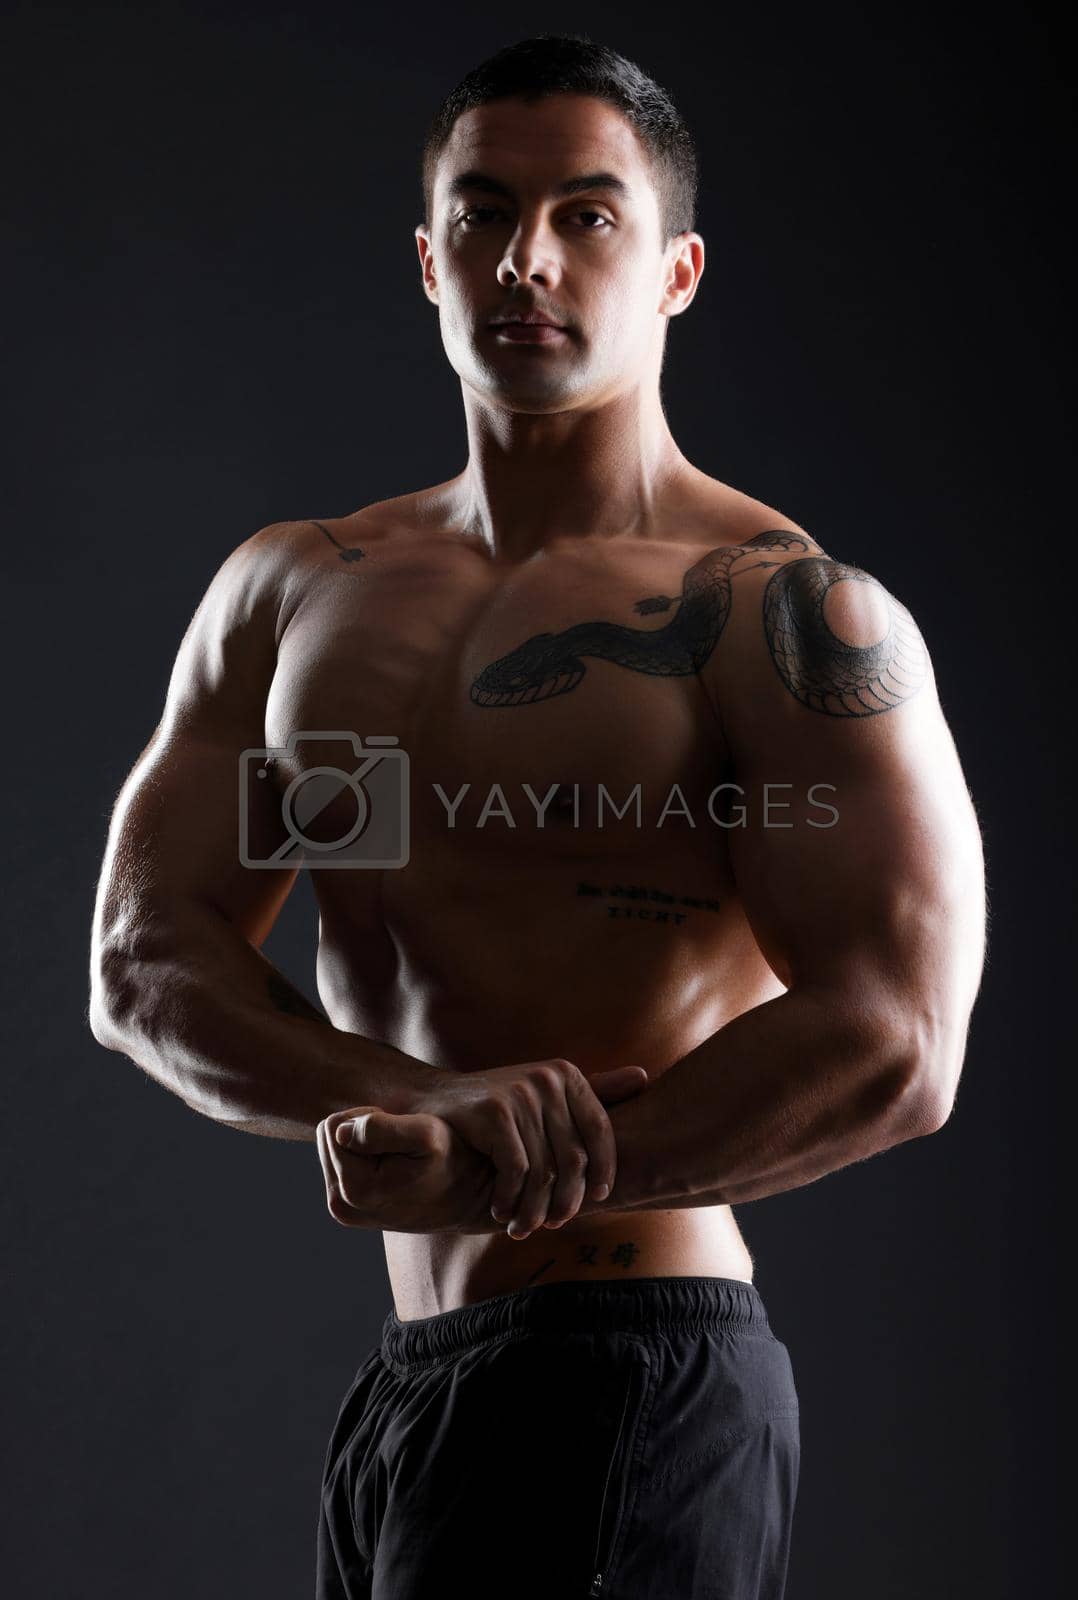 Royalty free image of Flex now, talk later. athletic young man flexing his muscles while posing against a dark background. by YuriArcurs